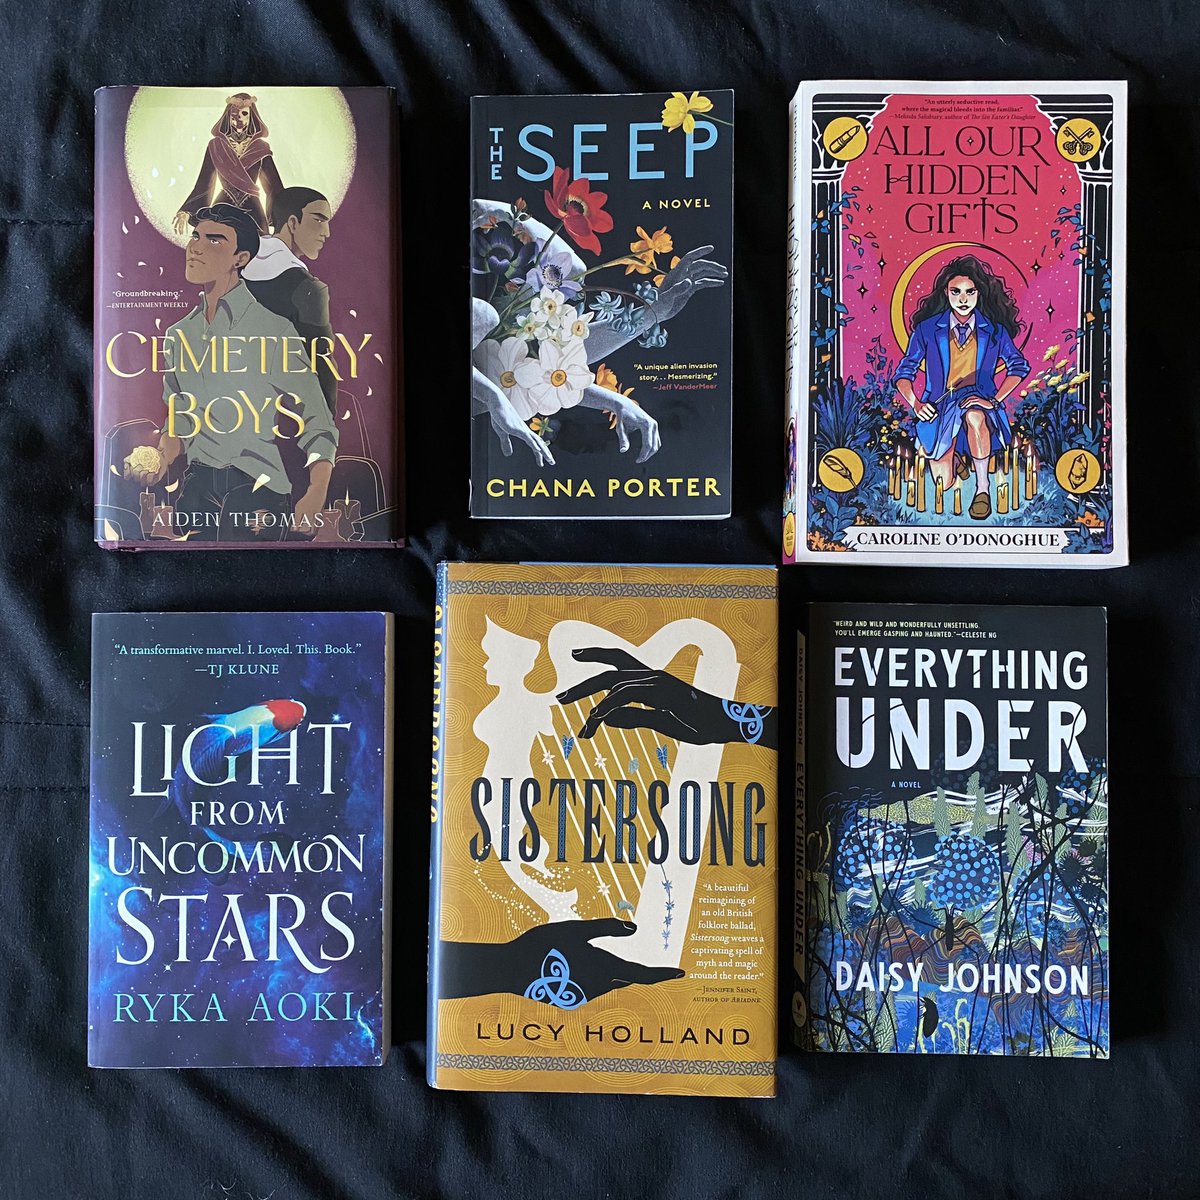 happy #TransRightsReadathon 🏳️‍⚧️ these are some of my favorite reads featuring trans or gender nonconformity characters! As part of this weeks readathon, I read the Seep & Cemetery Boys. The others on this list are some all time favorites! I am proud to say I #readqueerallyear💗🎀